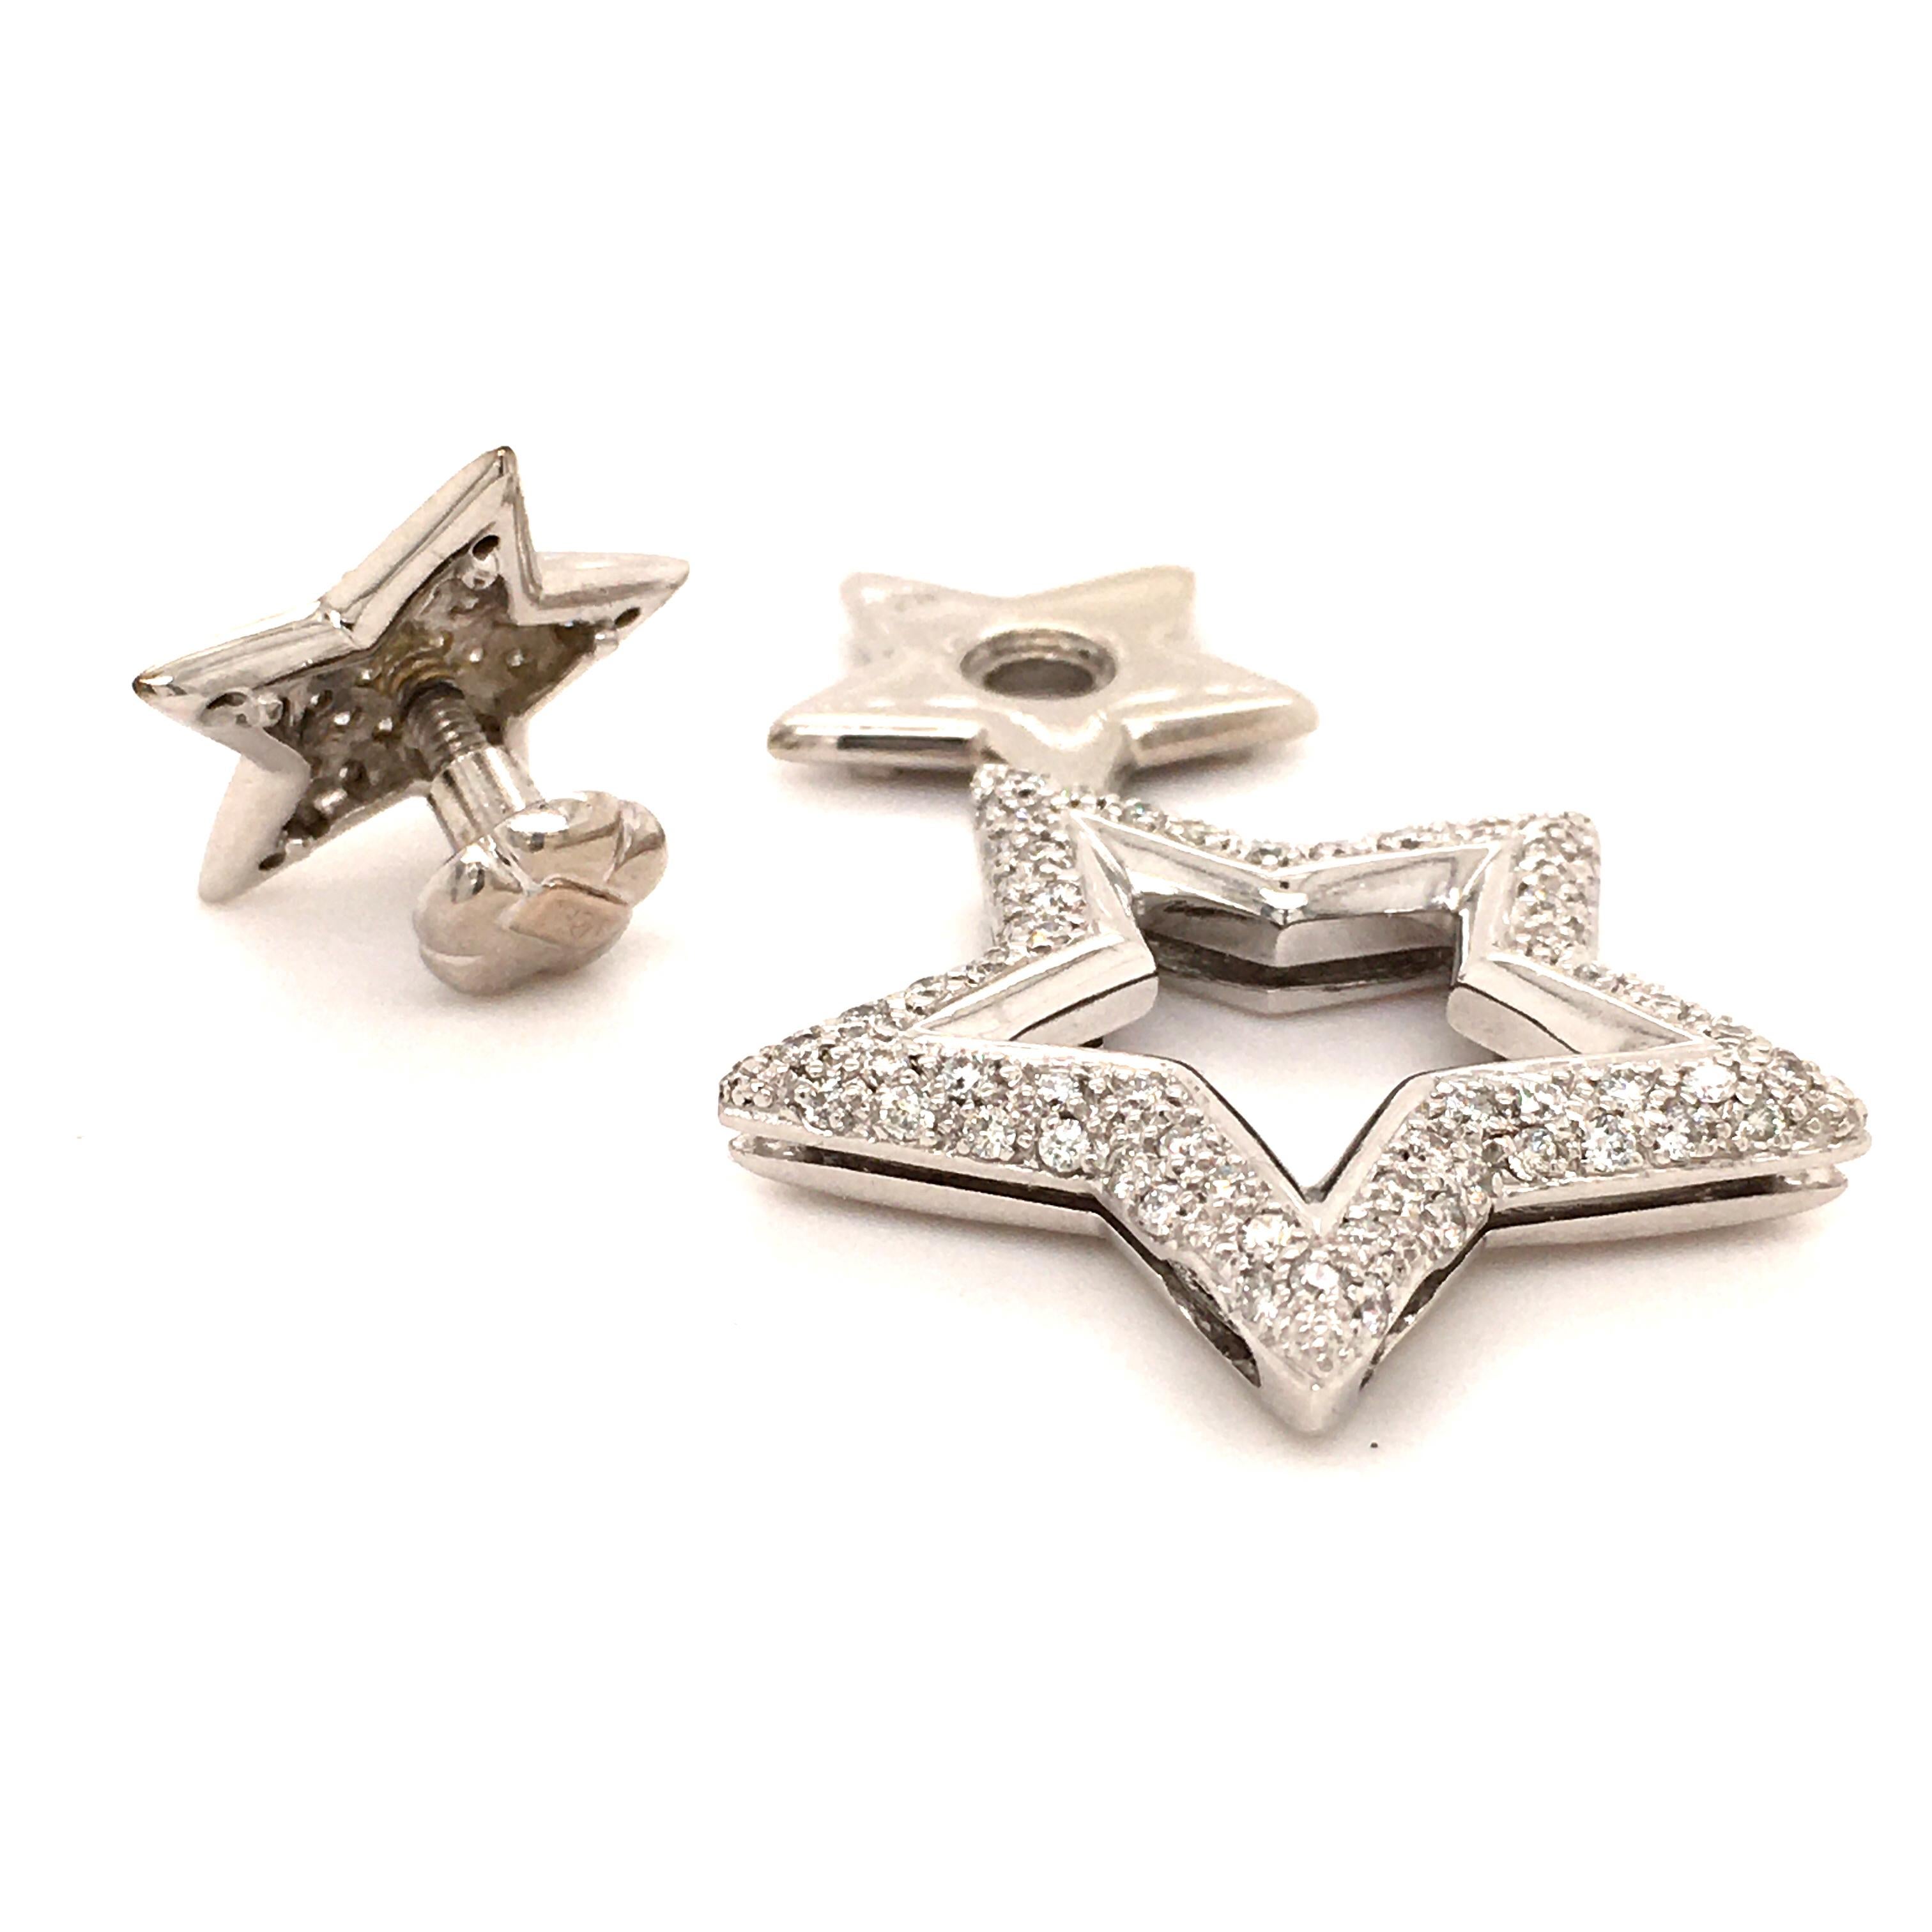 Gorgeous white gold 750 double star pendant made by Swiss Jeweller Christ, set with brilliant cut diamonds totaling approx. 1.20 ct of G/H-vs/si quality. The two stars are detachable so one can be worn as a pendant and the counter part as a